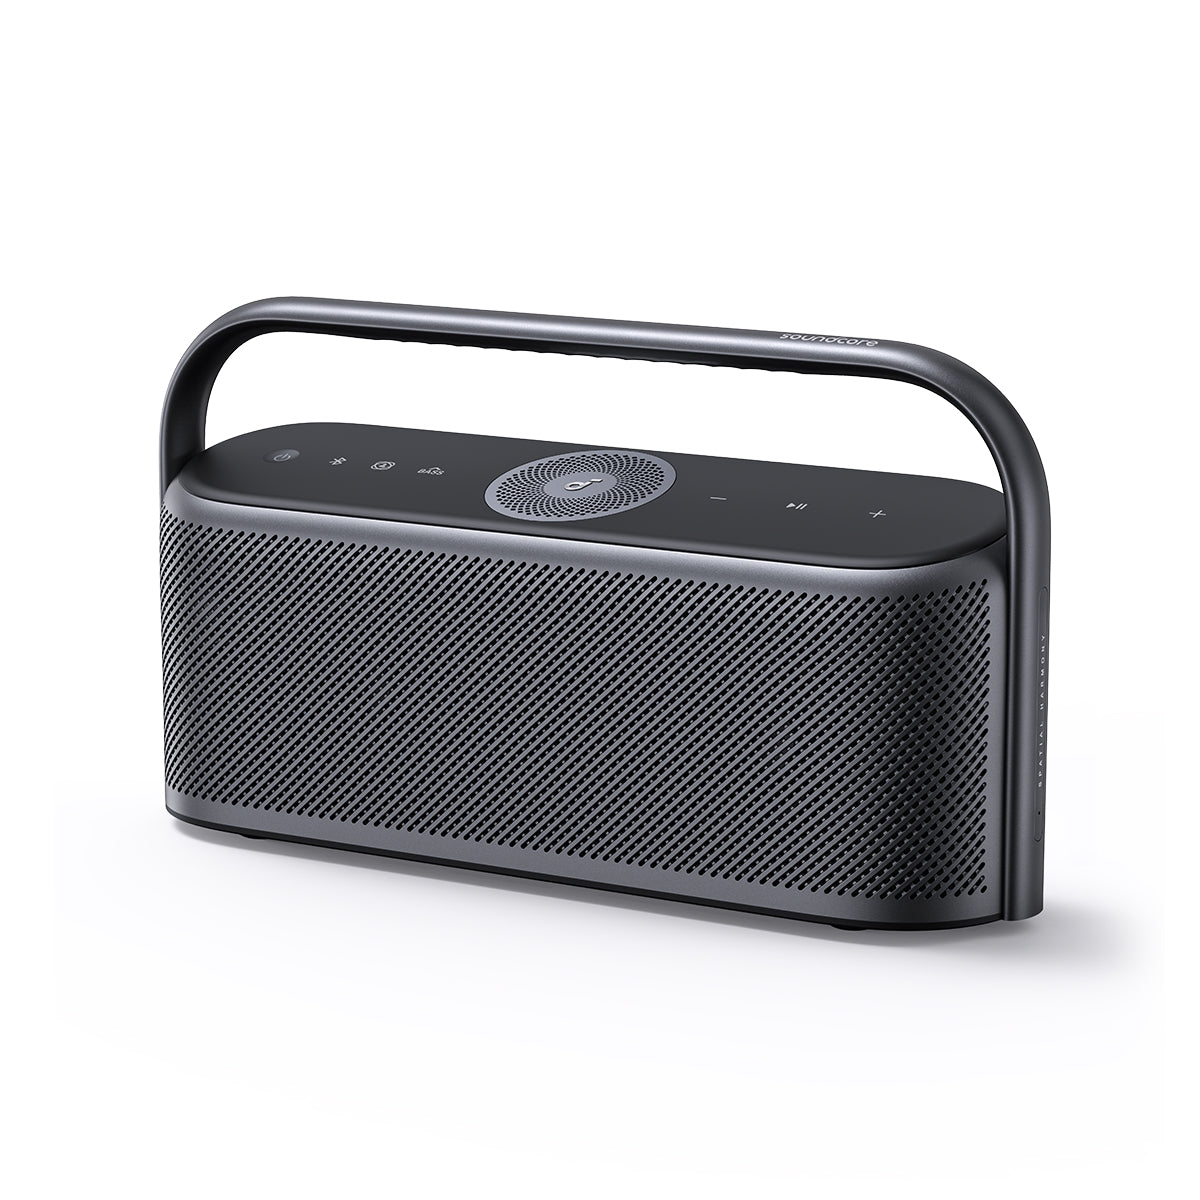 Upgraded, Anker Soundcore Bluetooth Speaker with IPX5 Waterproof, Stereo  Sound, 24H Playtime, Portable Wireless Speaker for iPhone, Samsung and More